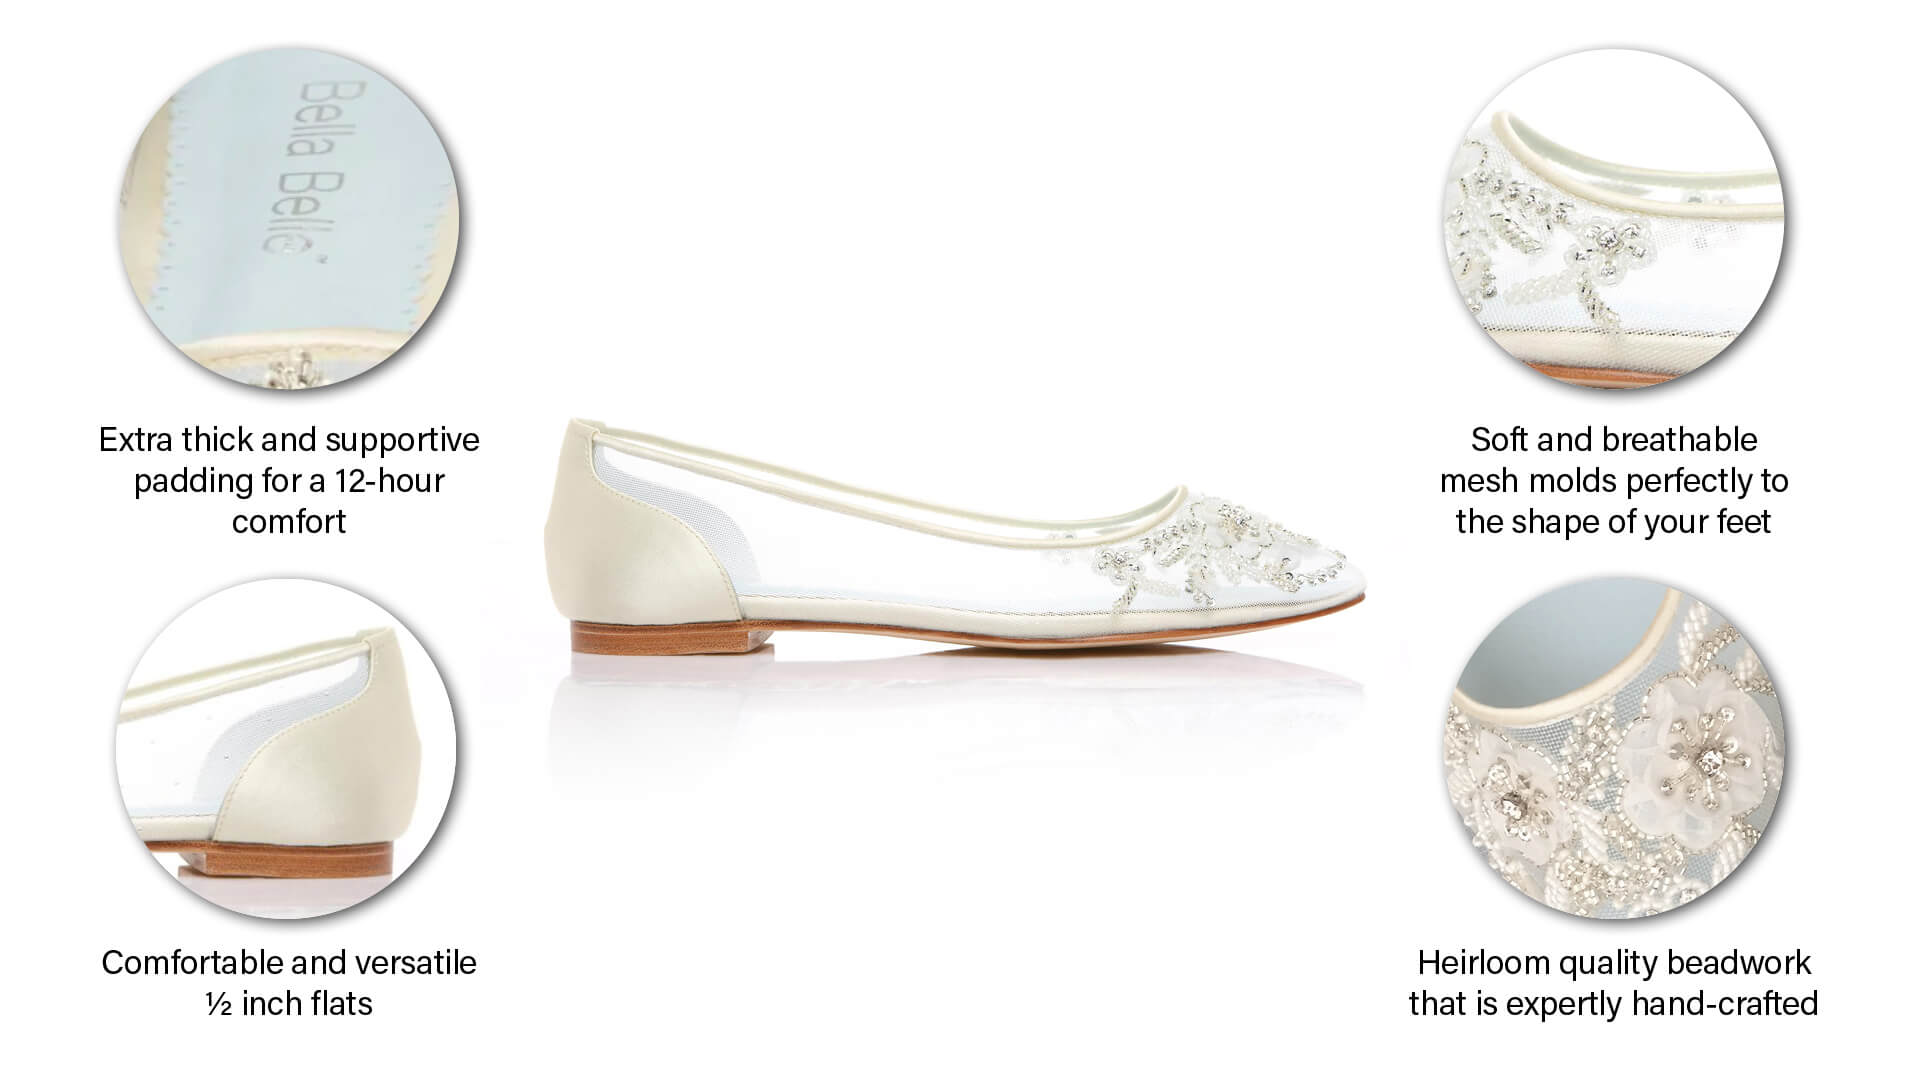 what makes bella belle bridal flats so special